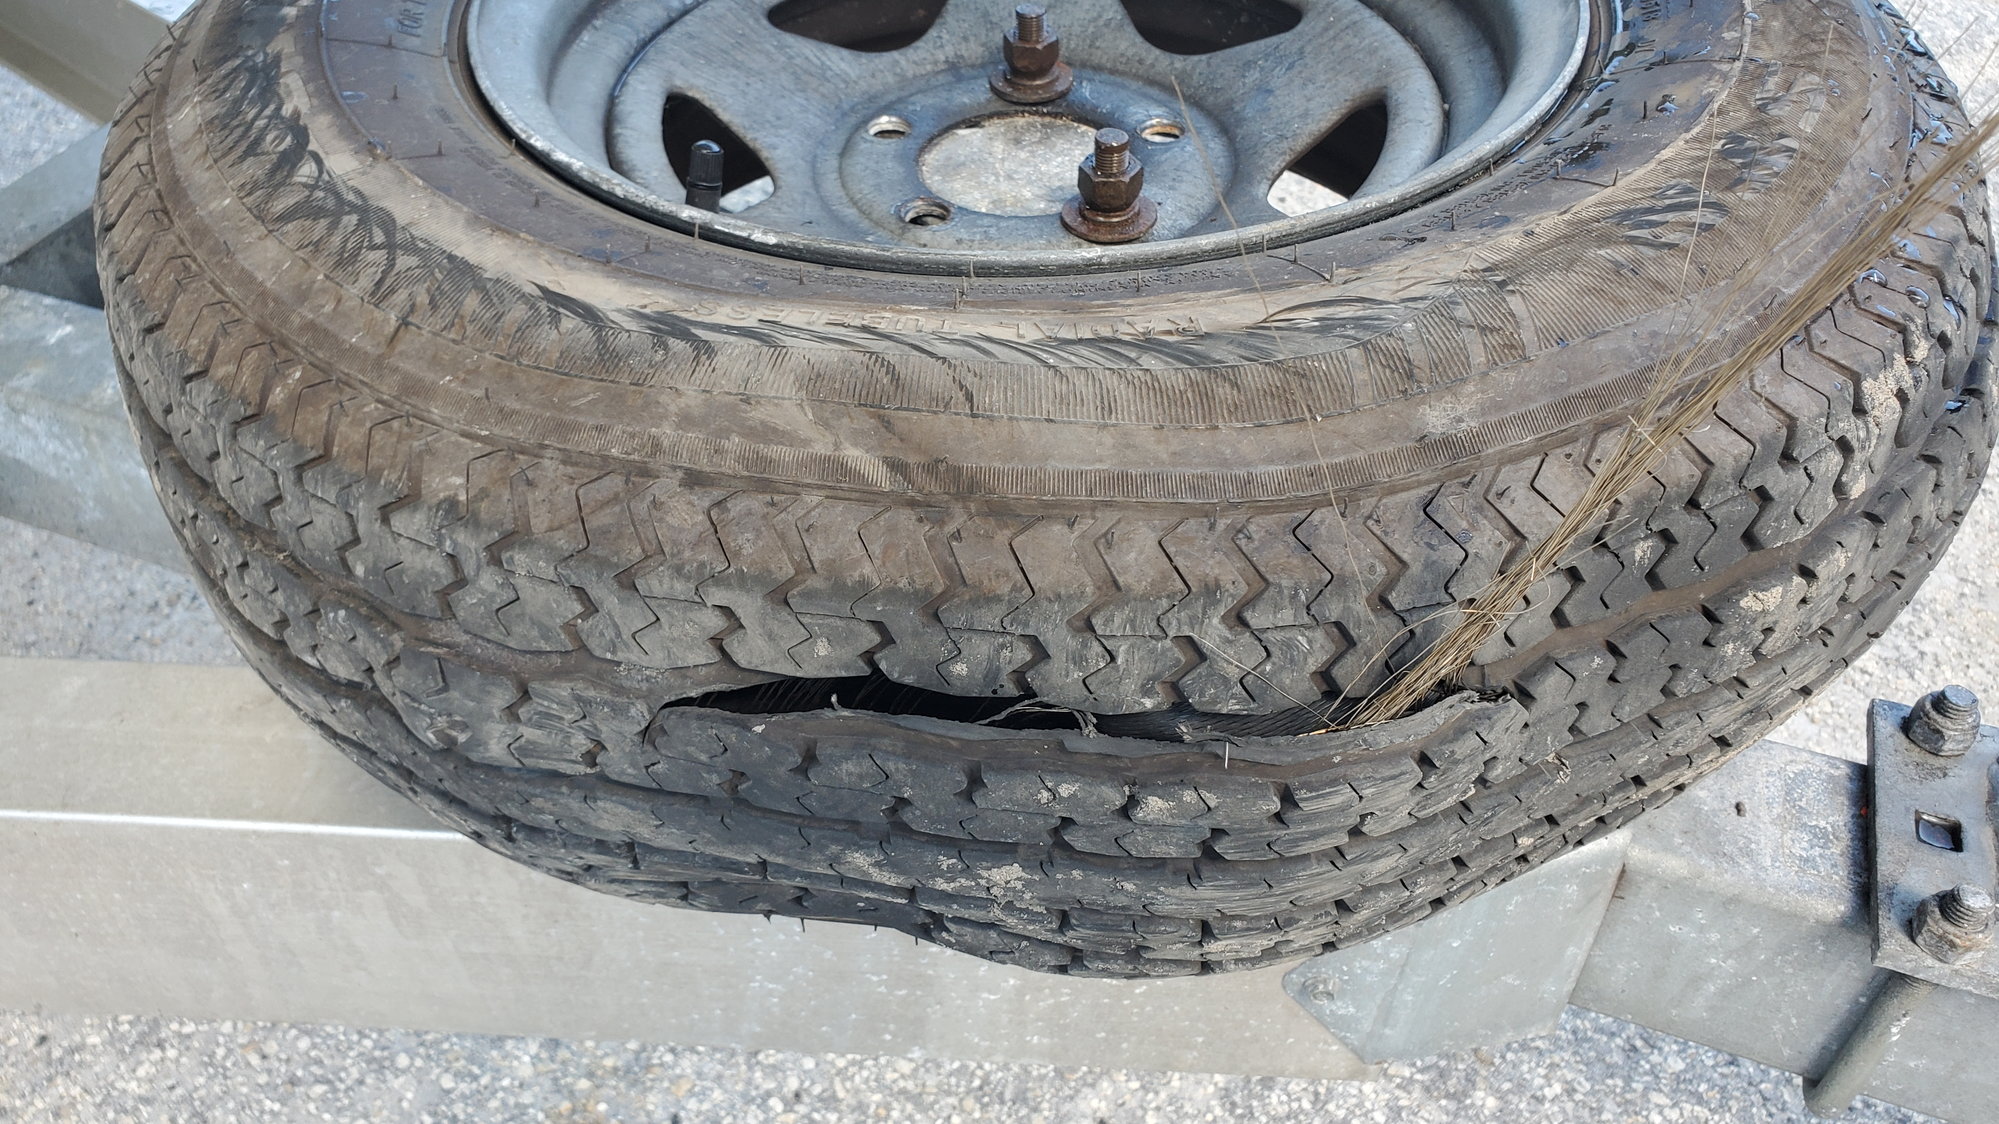 Trailer tire wear? - The Hull Truth - Boating and Fishing Forum